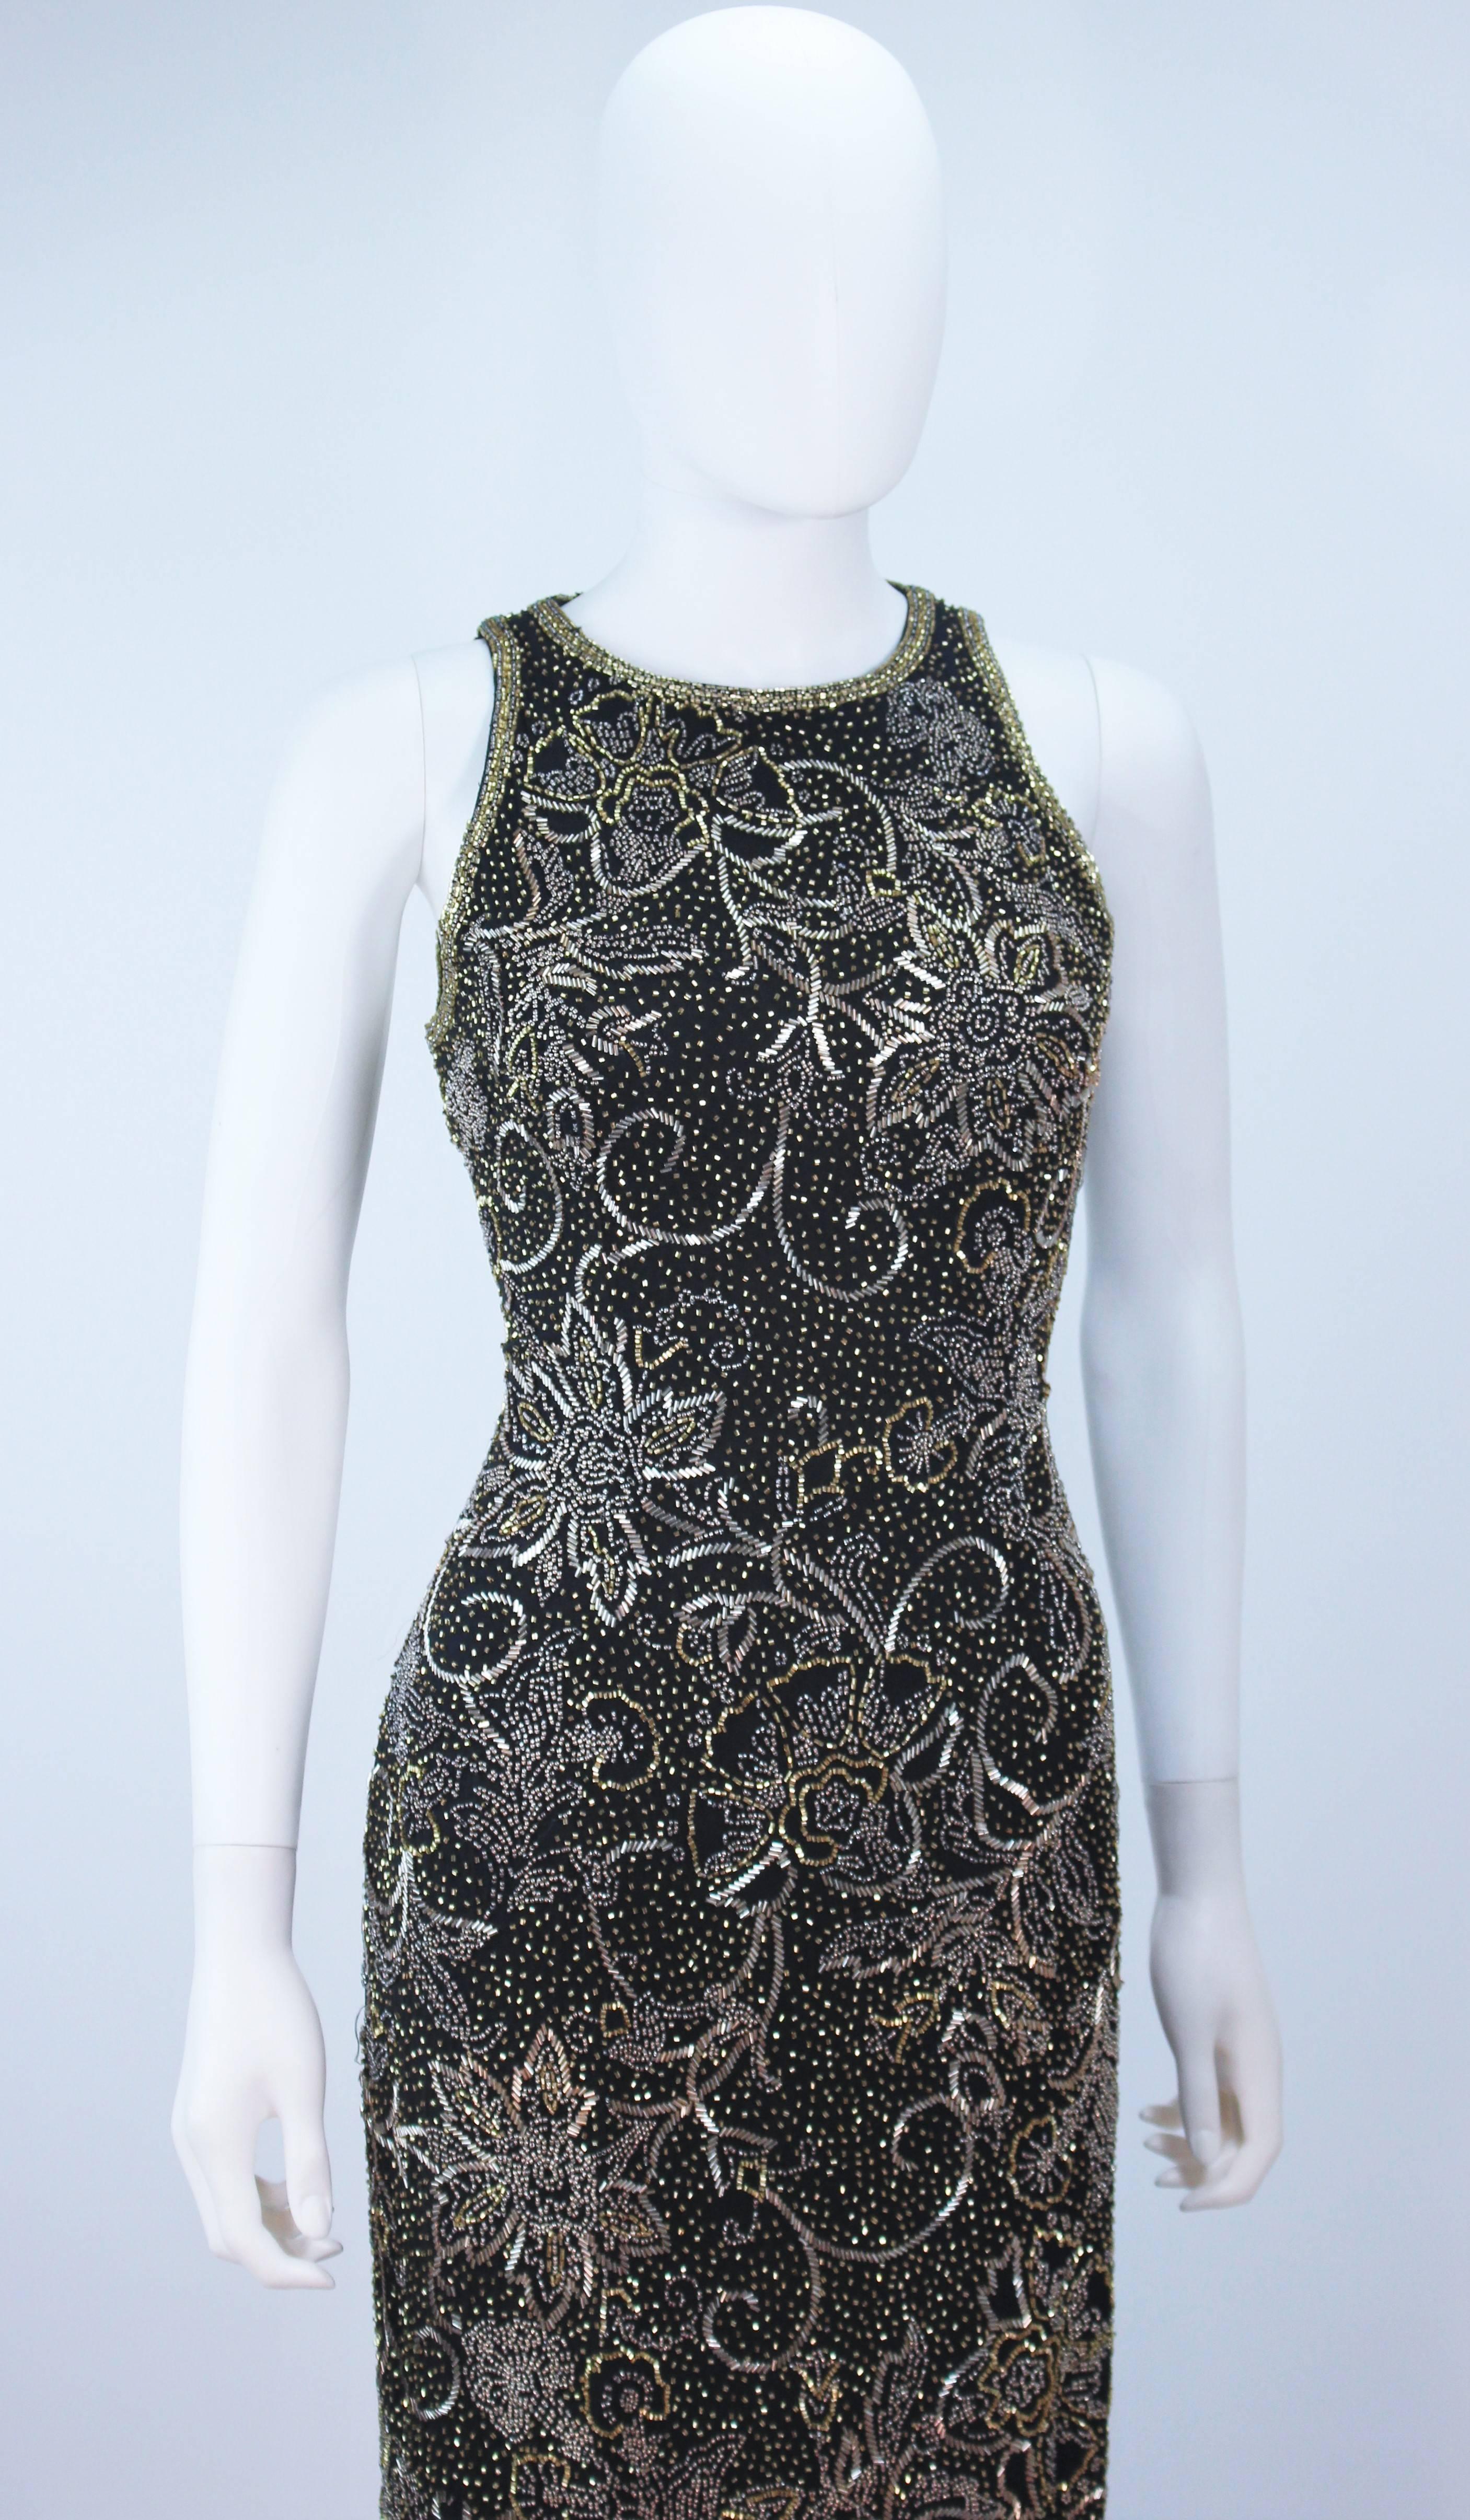 OLEG CASSINI Black and Gold Beaded Gown Size 8 For Sale 2